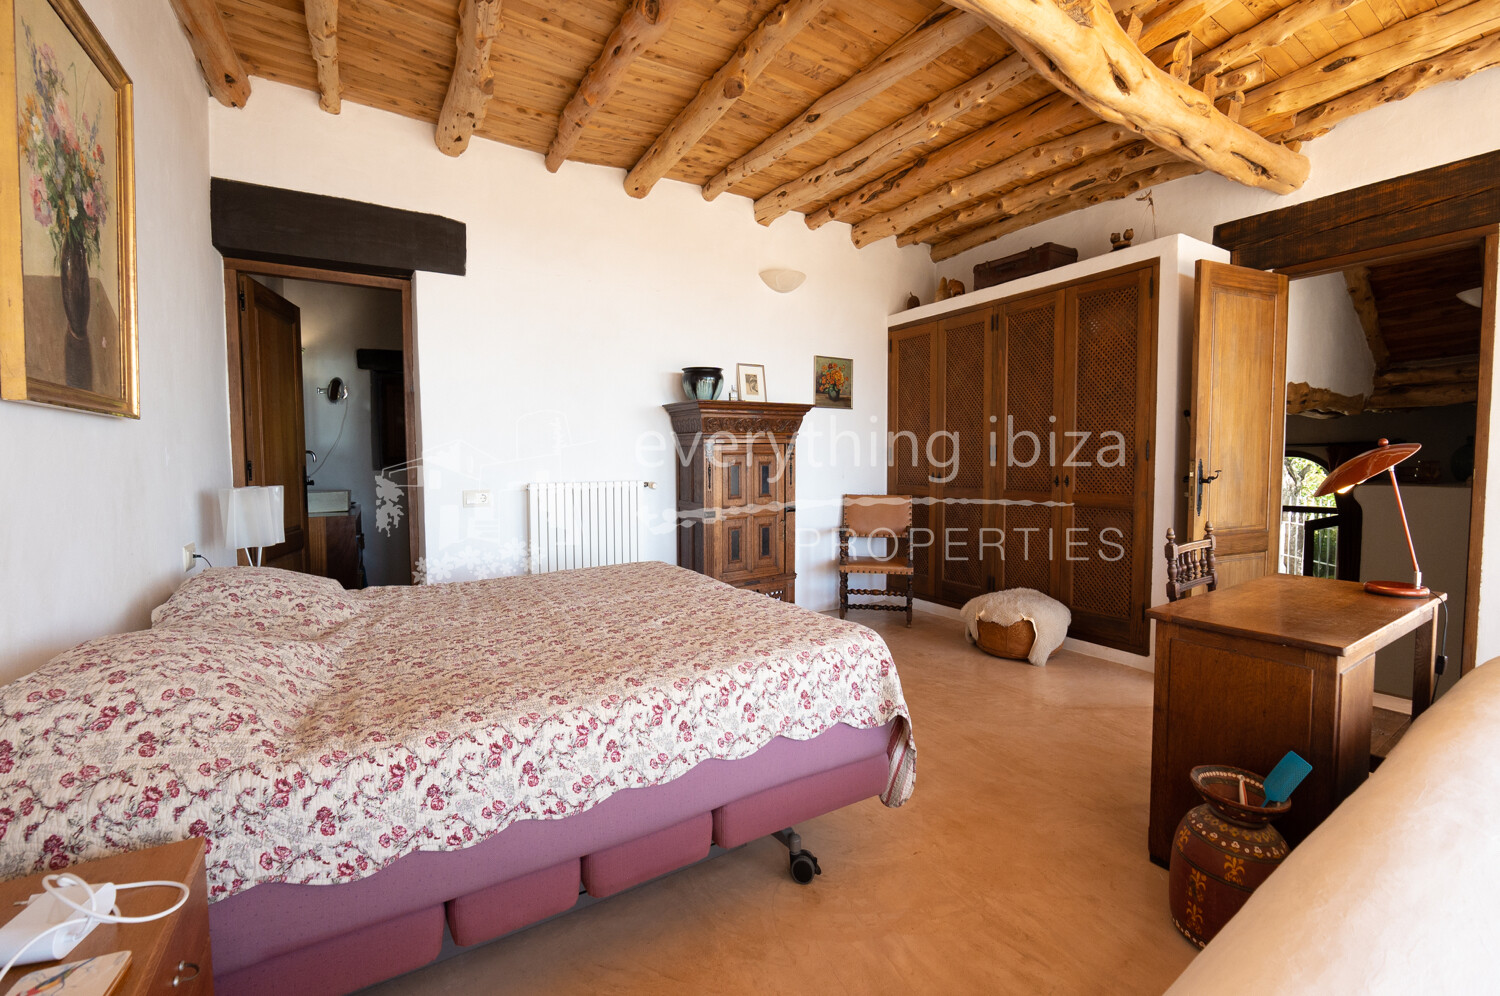 Authentic Country Finca with Sea and Rural Views, Tourist License and Infinity Pool,ref. 1668, for sale in Ibiza by everything ibiza Properties